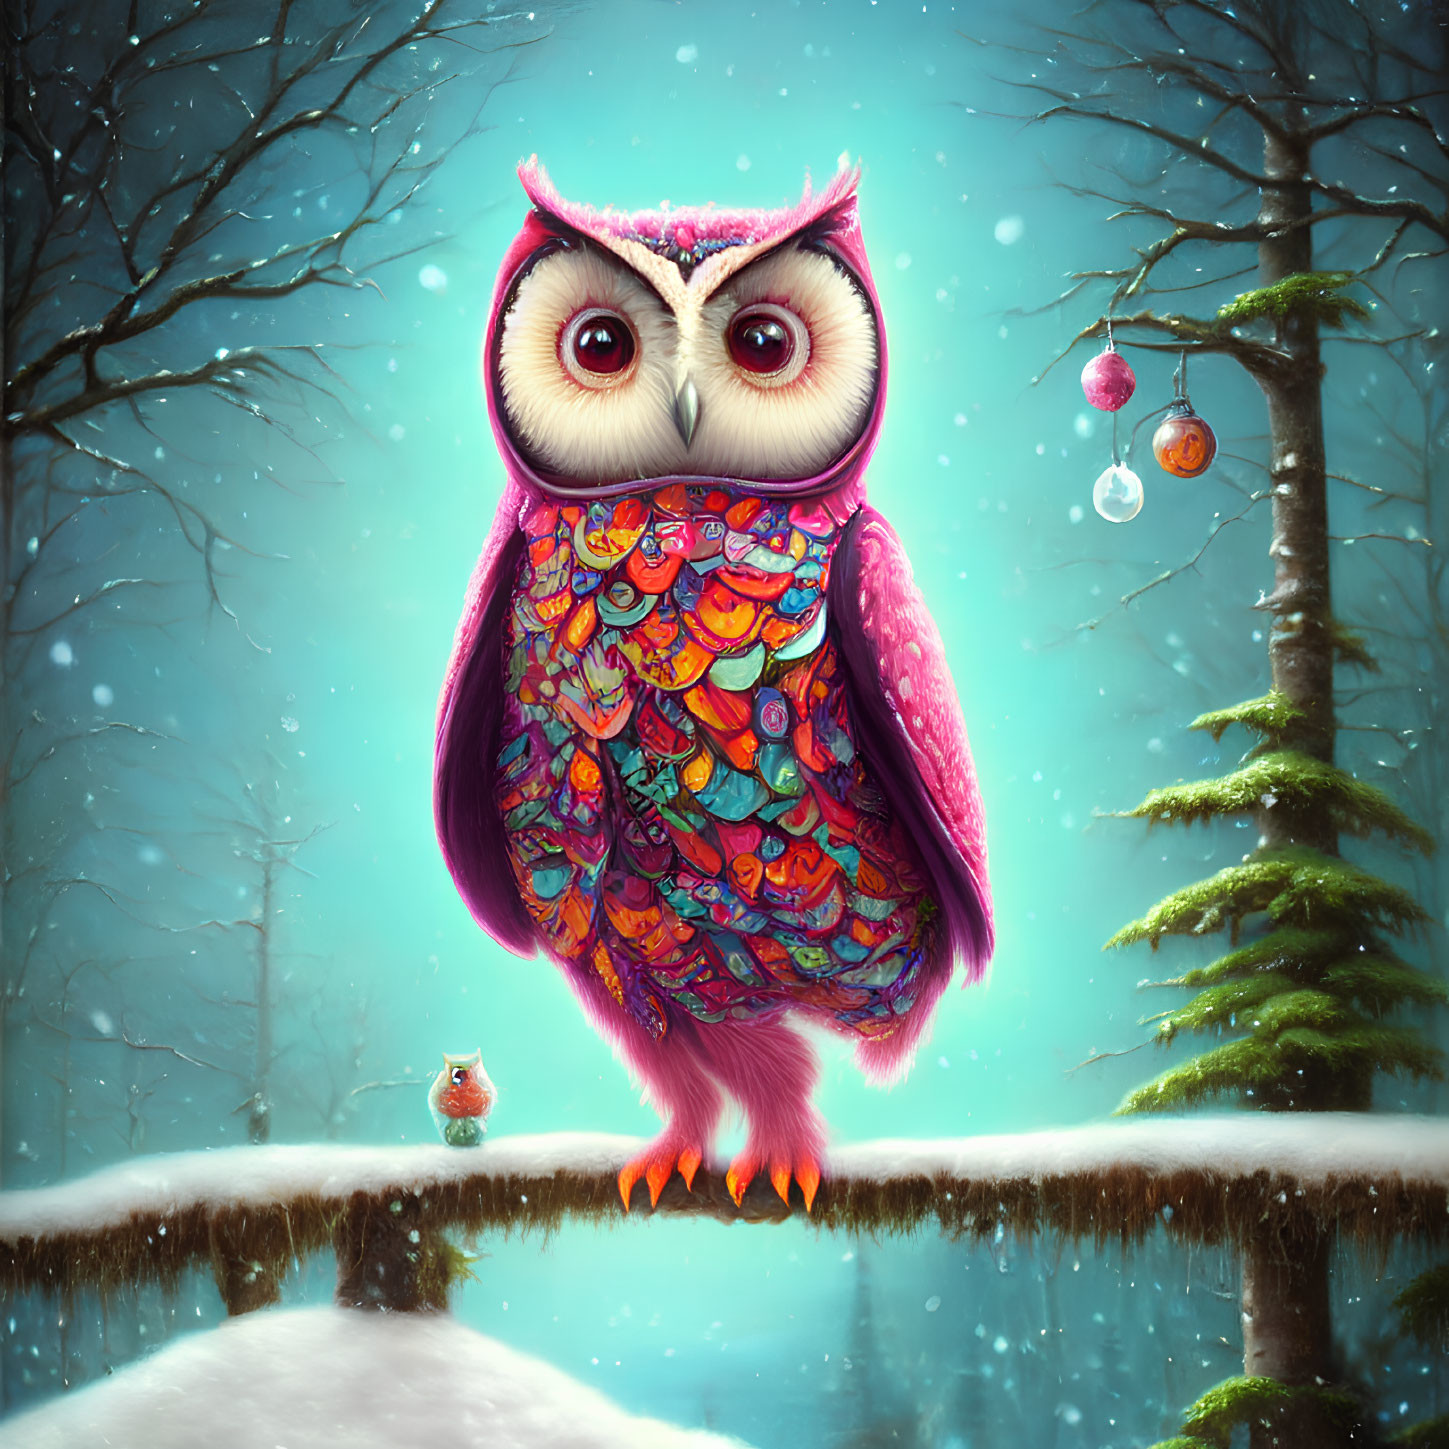 Colorful illustrated owl in snowy landscape with intricate patterns